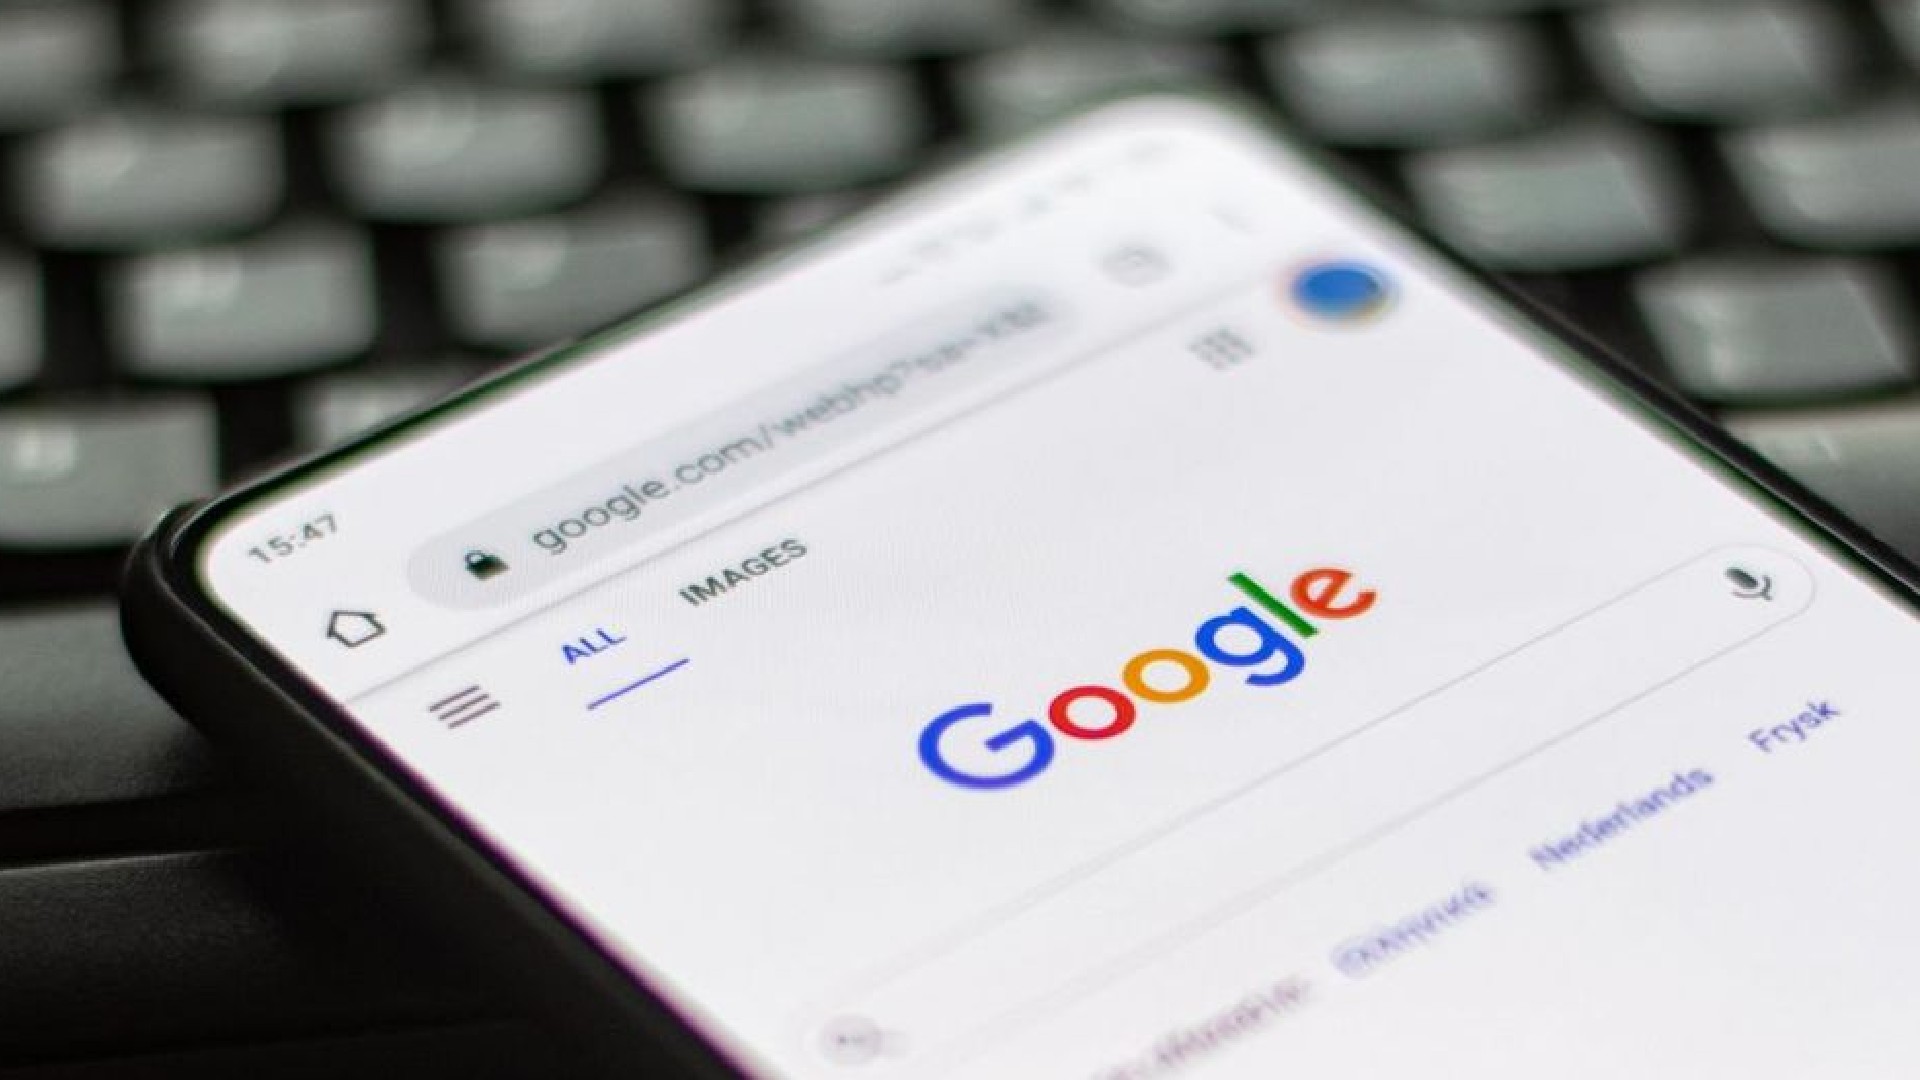 Google Users Can Now Quickly Delete The Last 15 Minutes Of Their Search History On Android